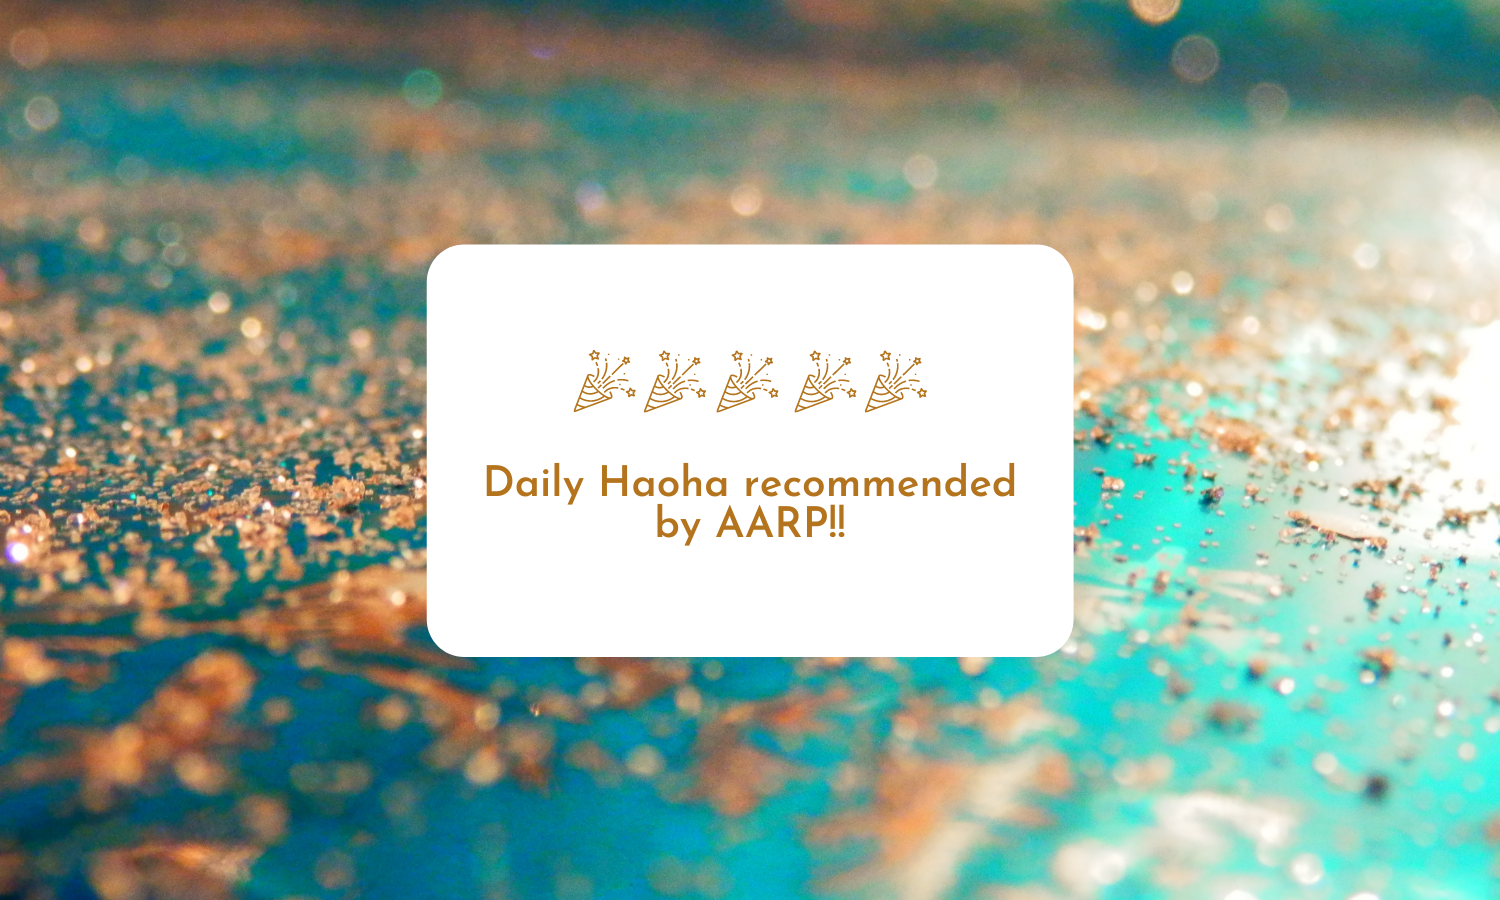 Daily Haloha recommended by AARP